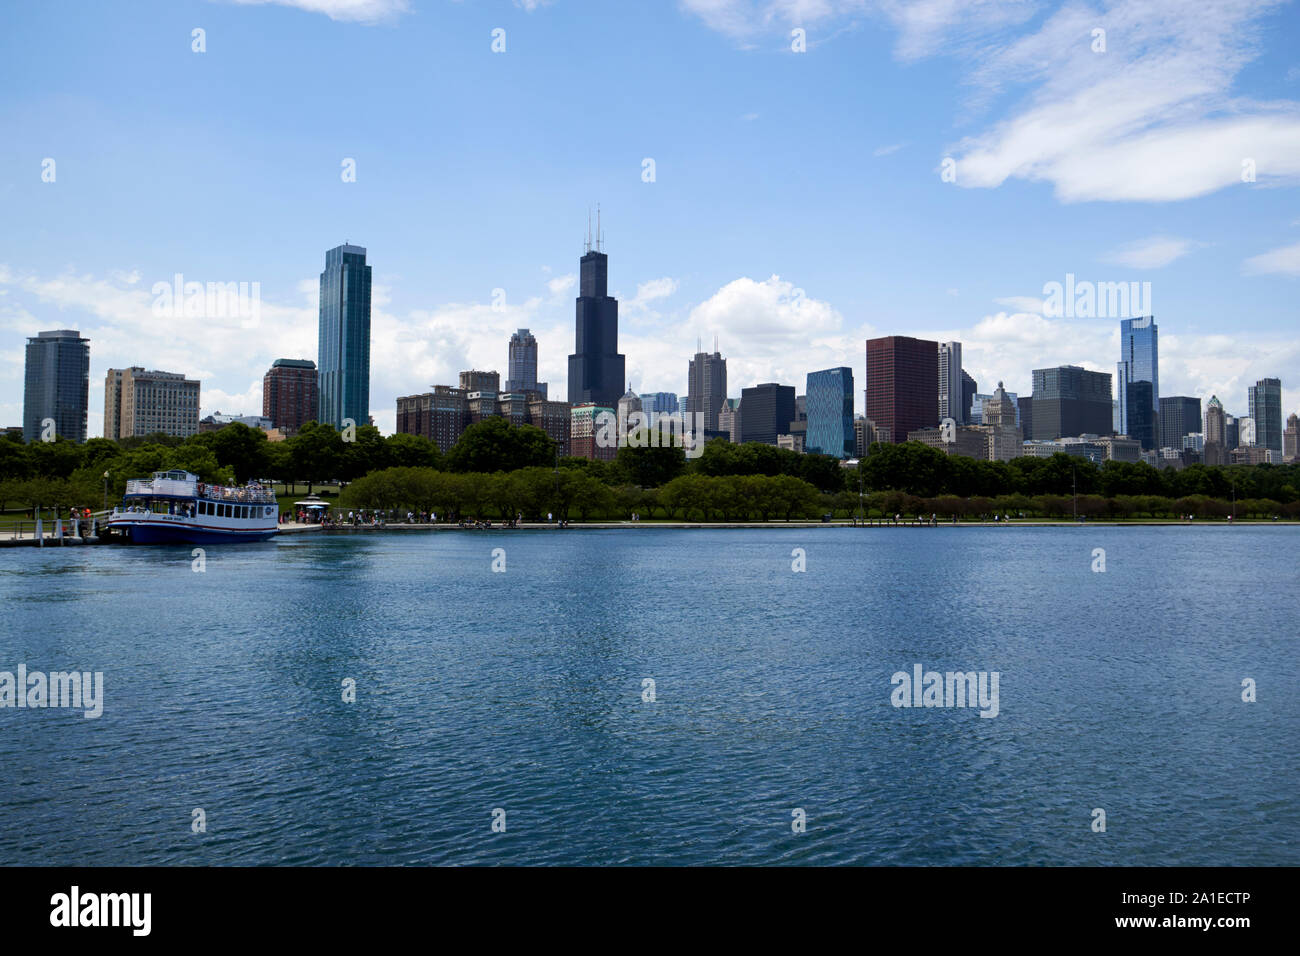 chicago city skyline as seen from the museum campus and lakefront trail chicago illinois united states of america Stock Photo